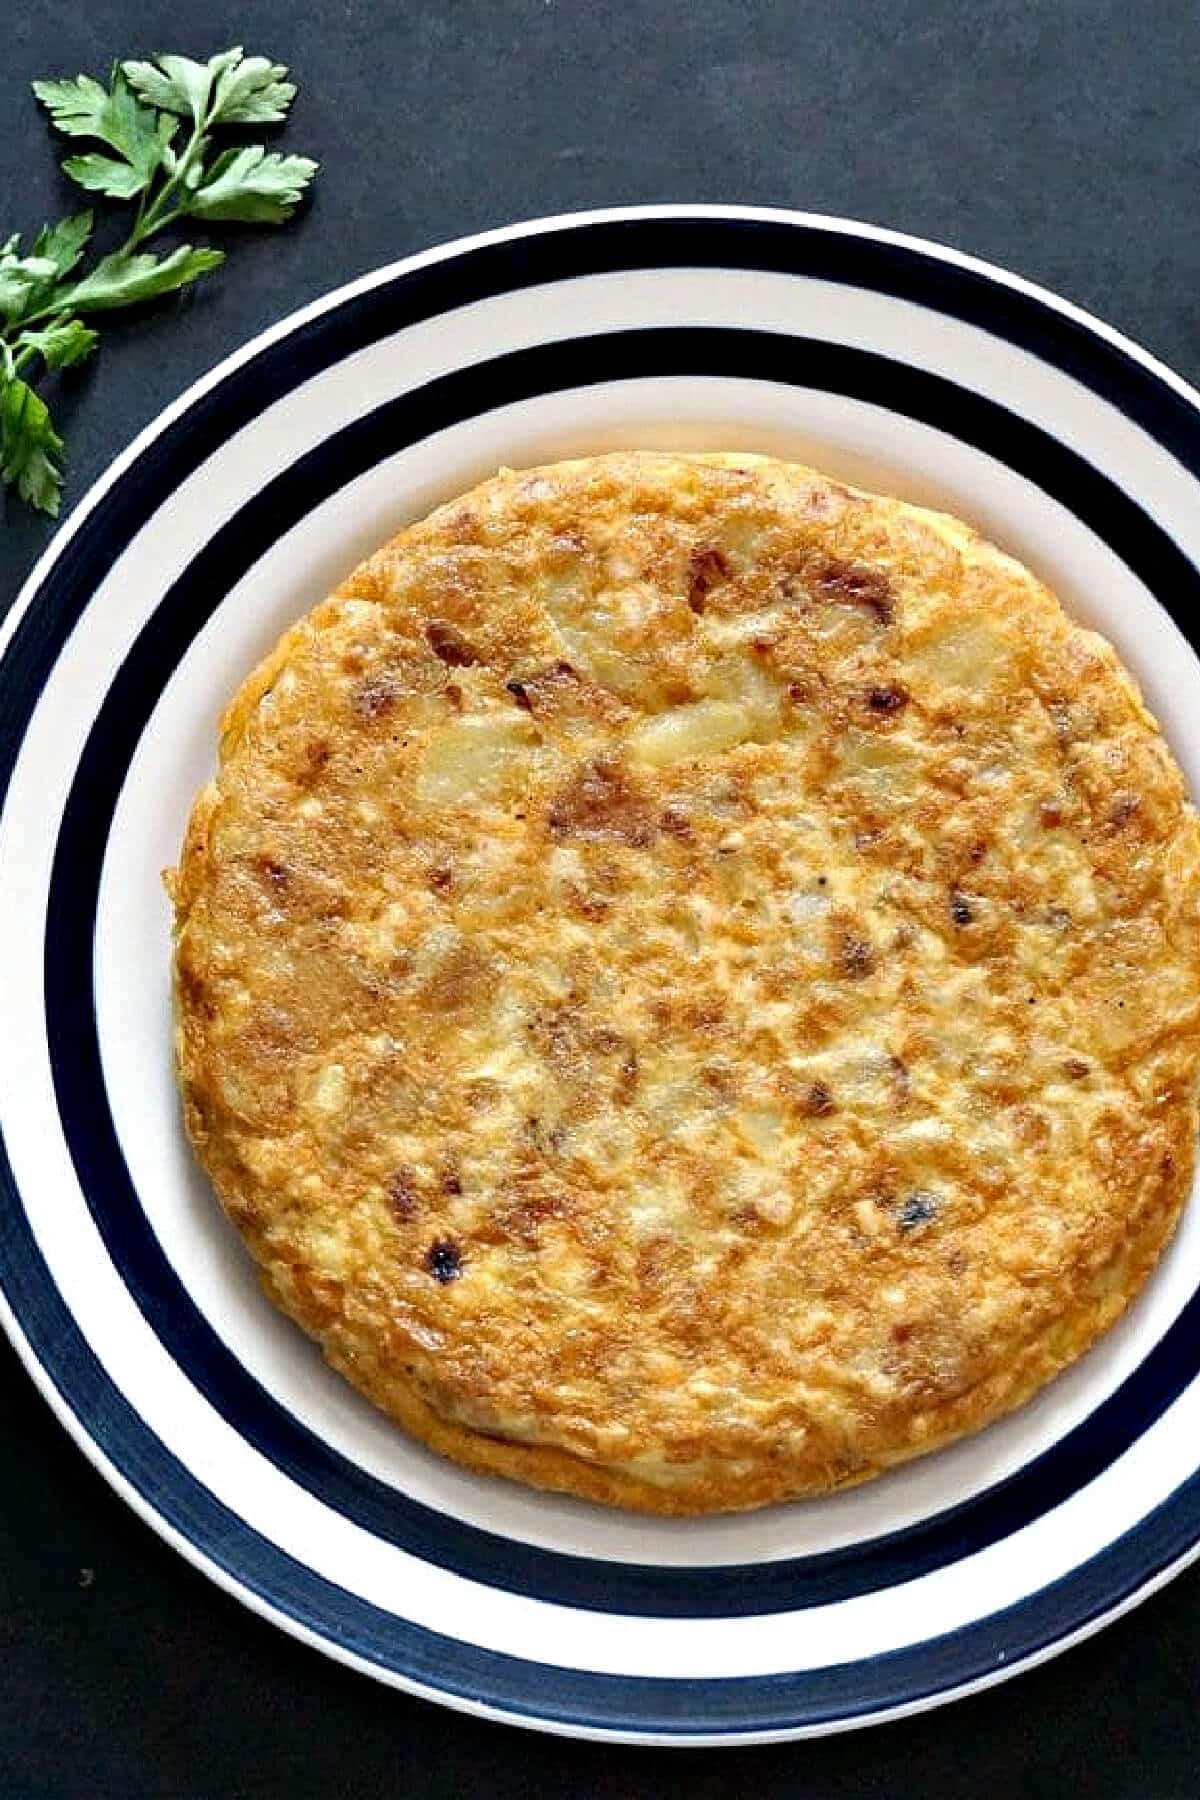 Overhead shoot of a plate with a potato omelette